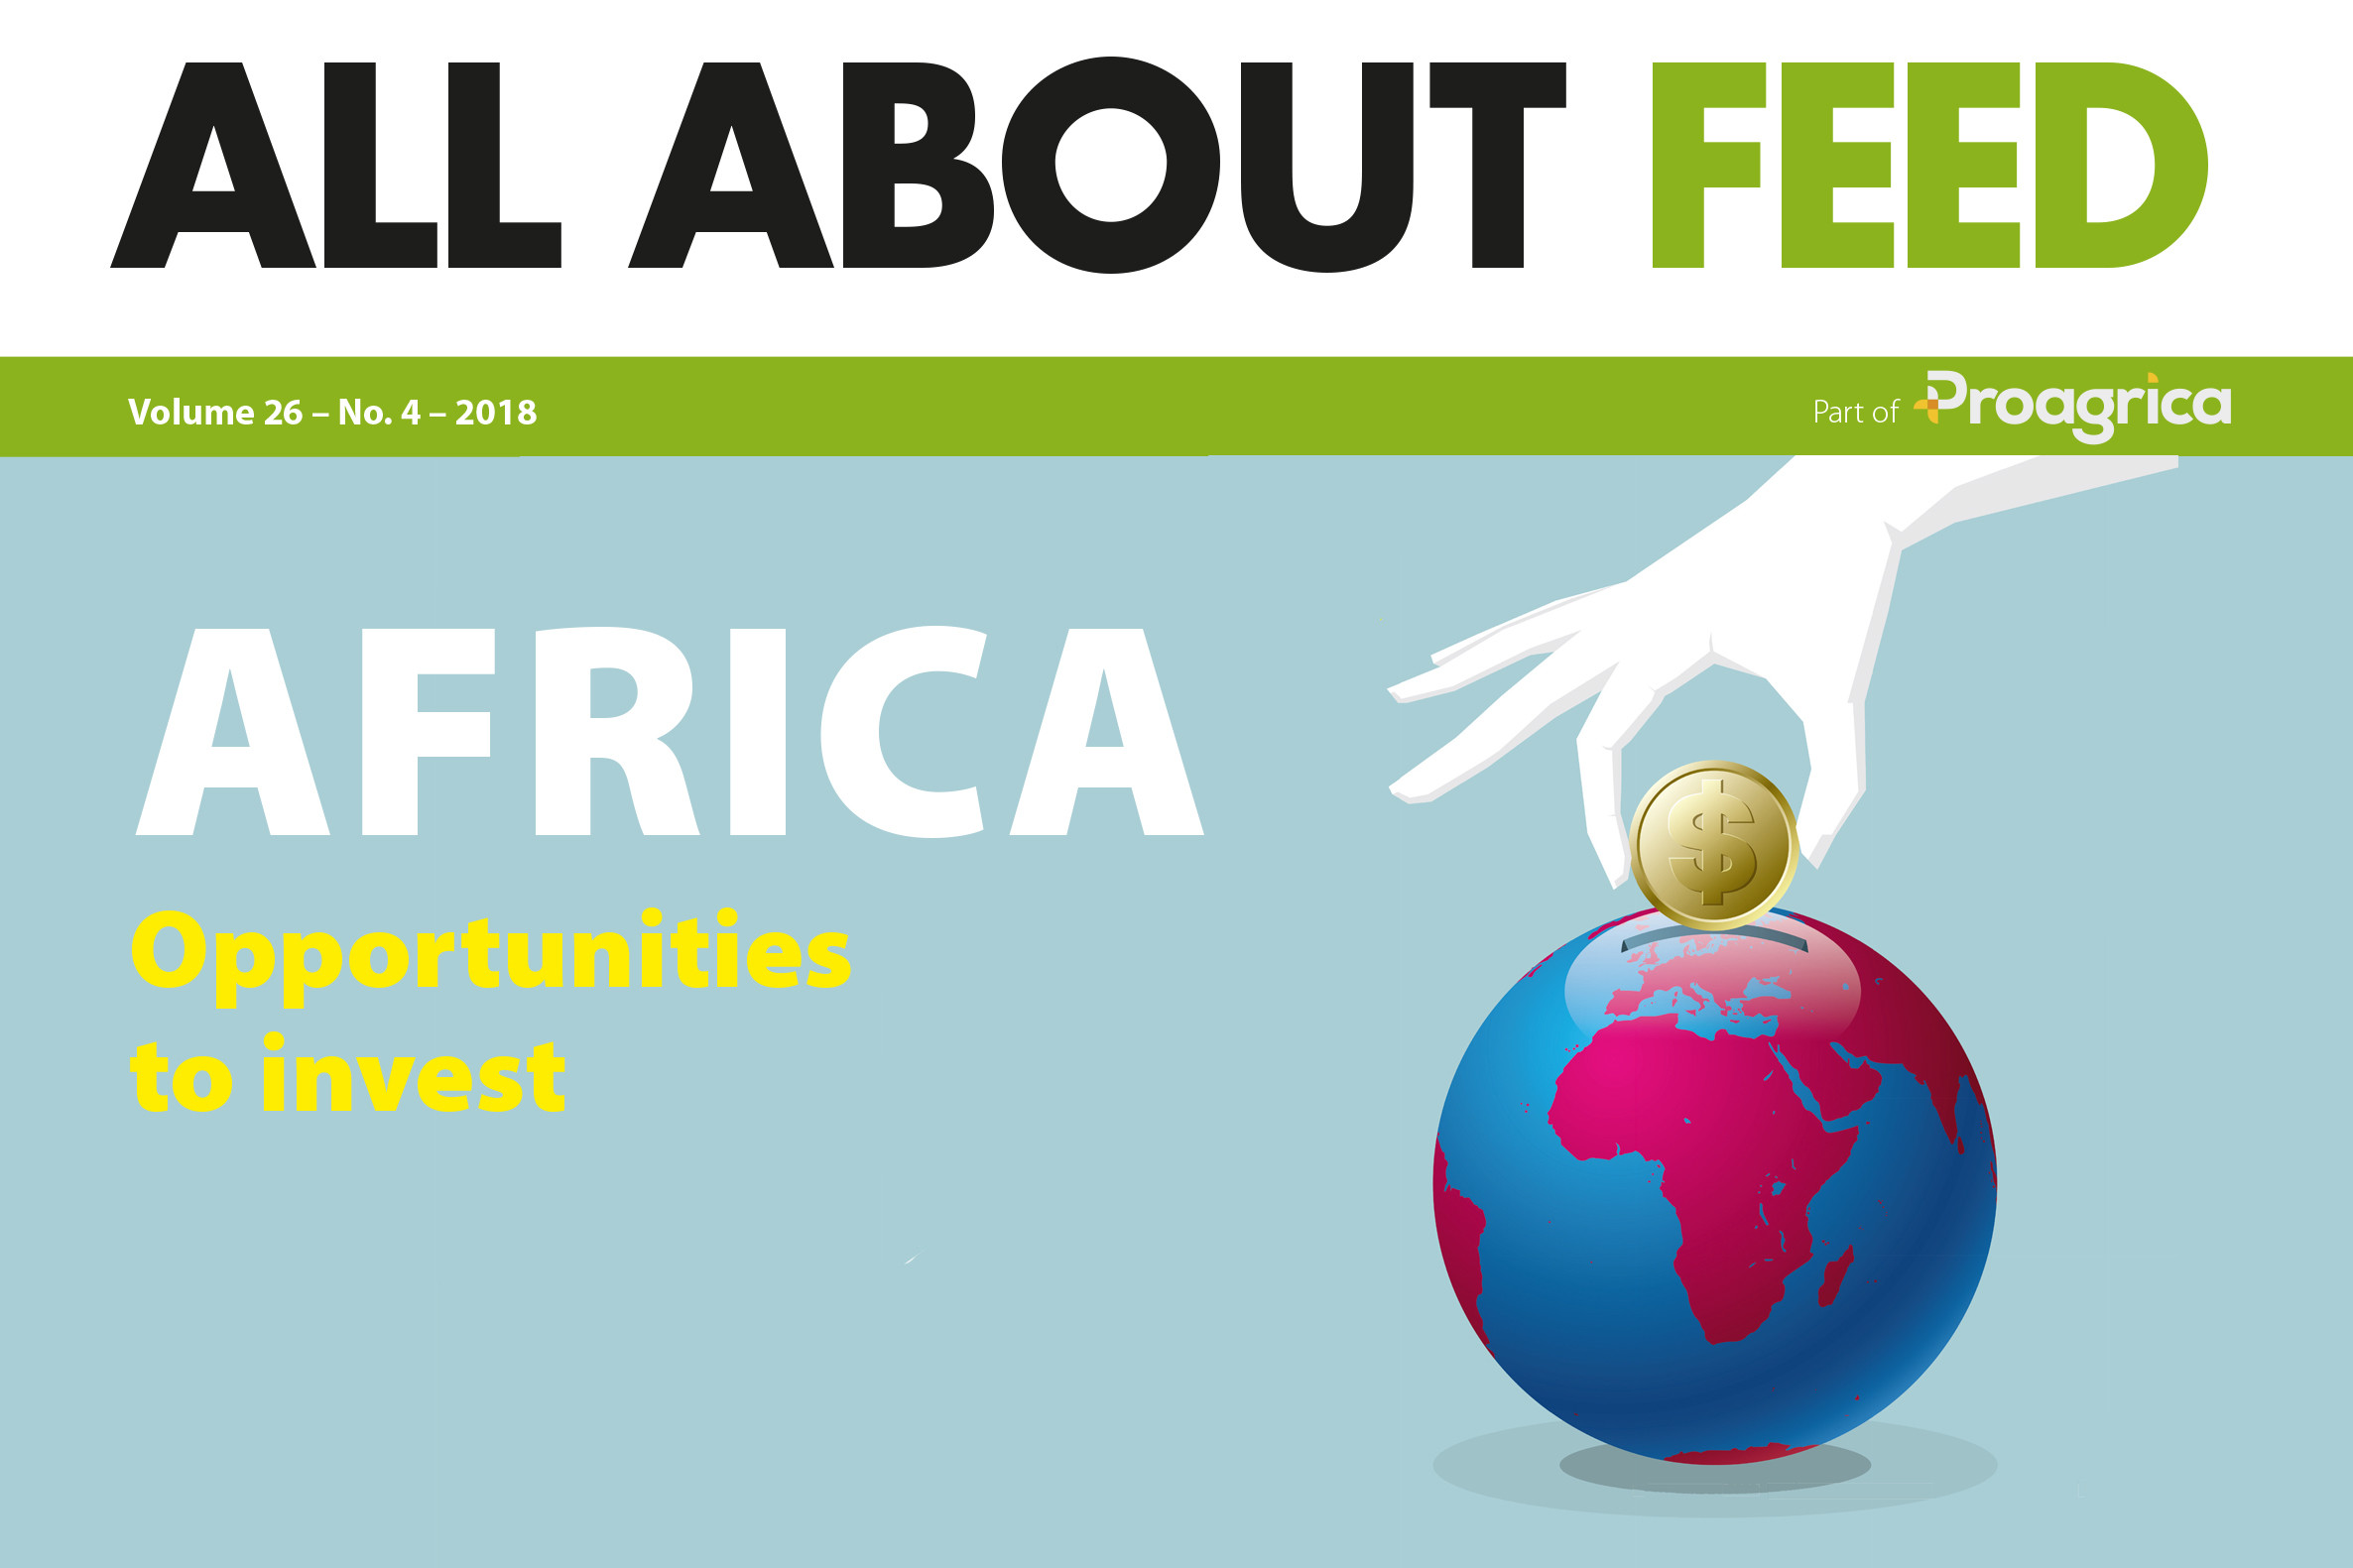 New issue All About Feed zooms in on Africa